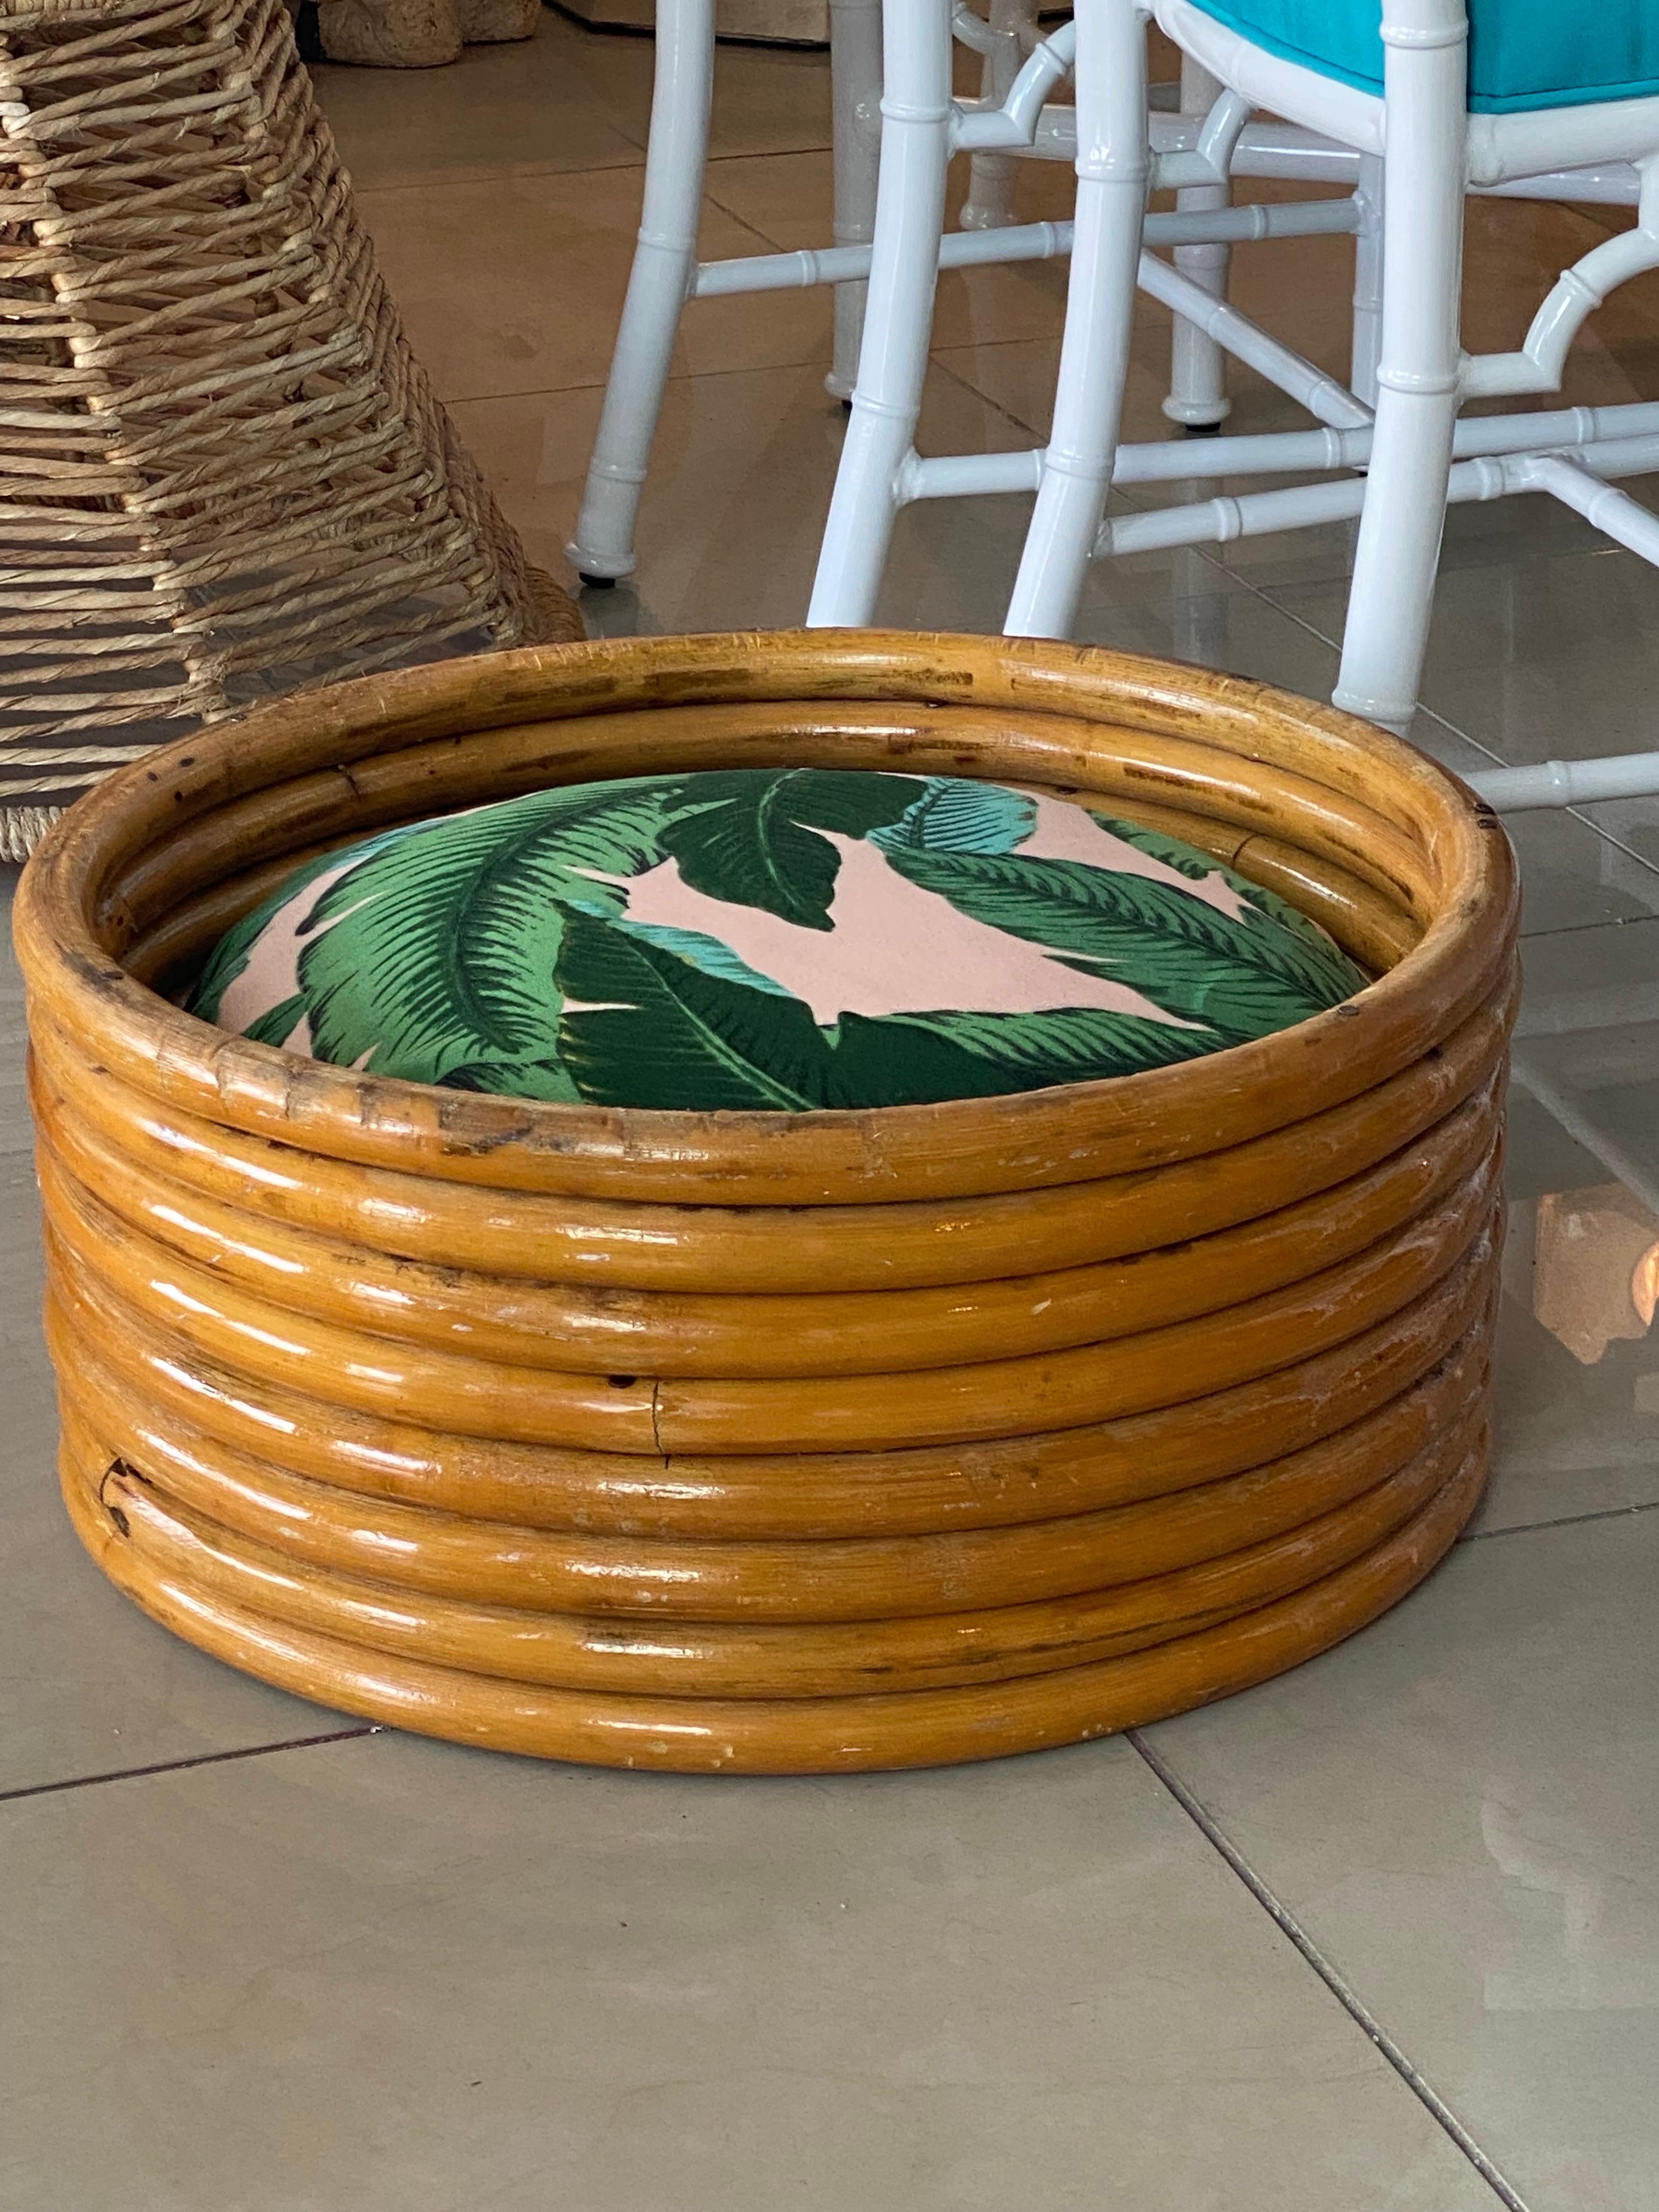 Beautiful vintage round rattan dog bed. Cushion has been custom made and is removable, washable with zippered cover for easy washing. Upholstery is outdoor fabric for durability.